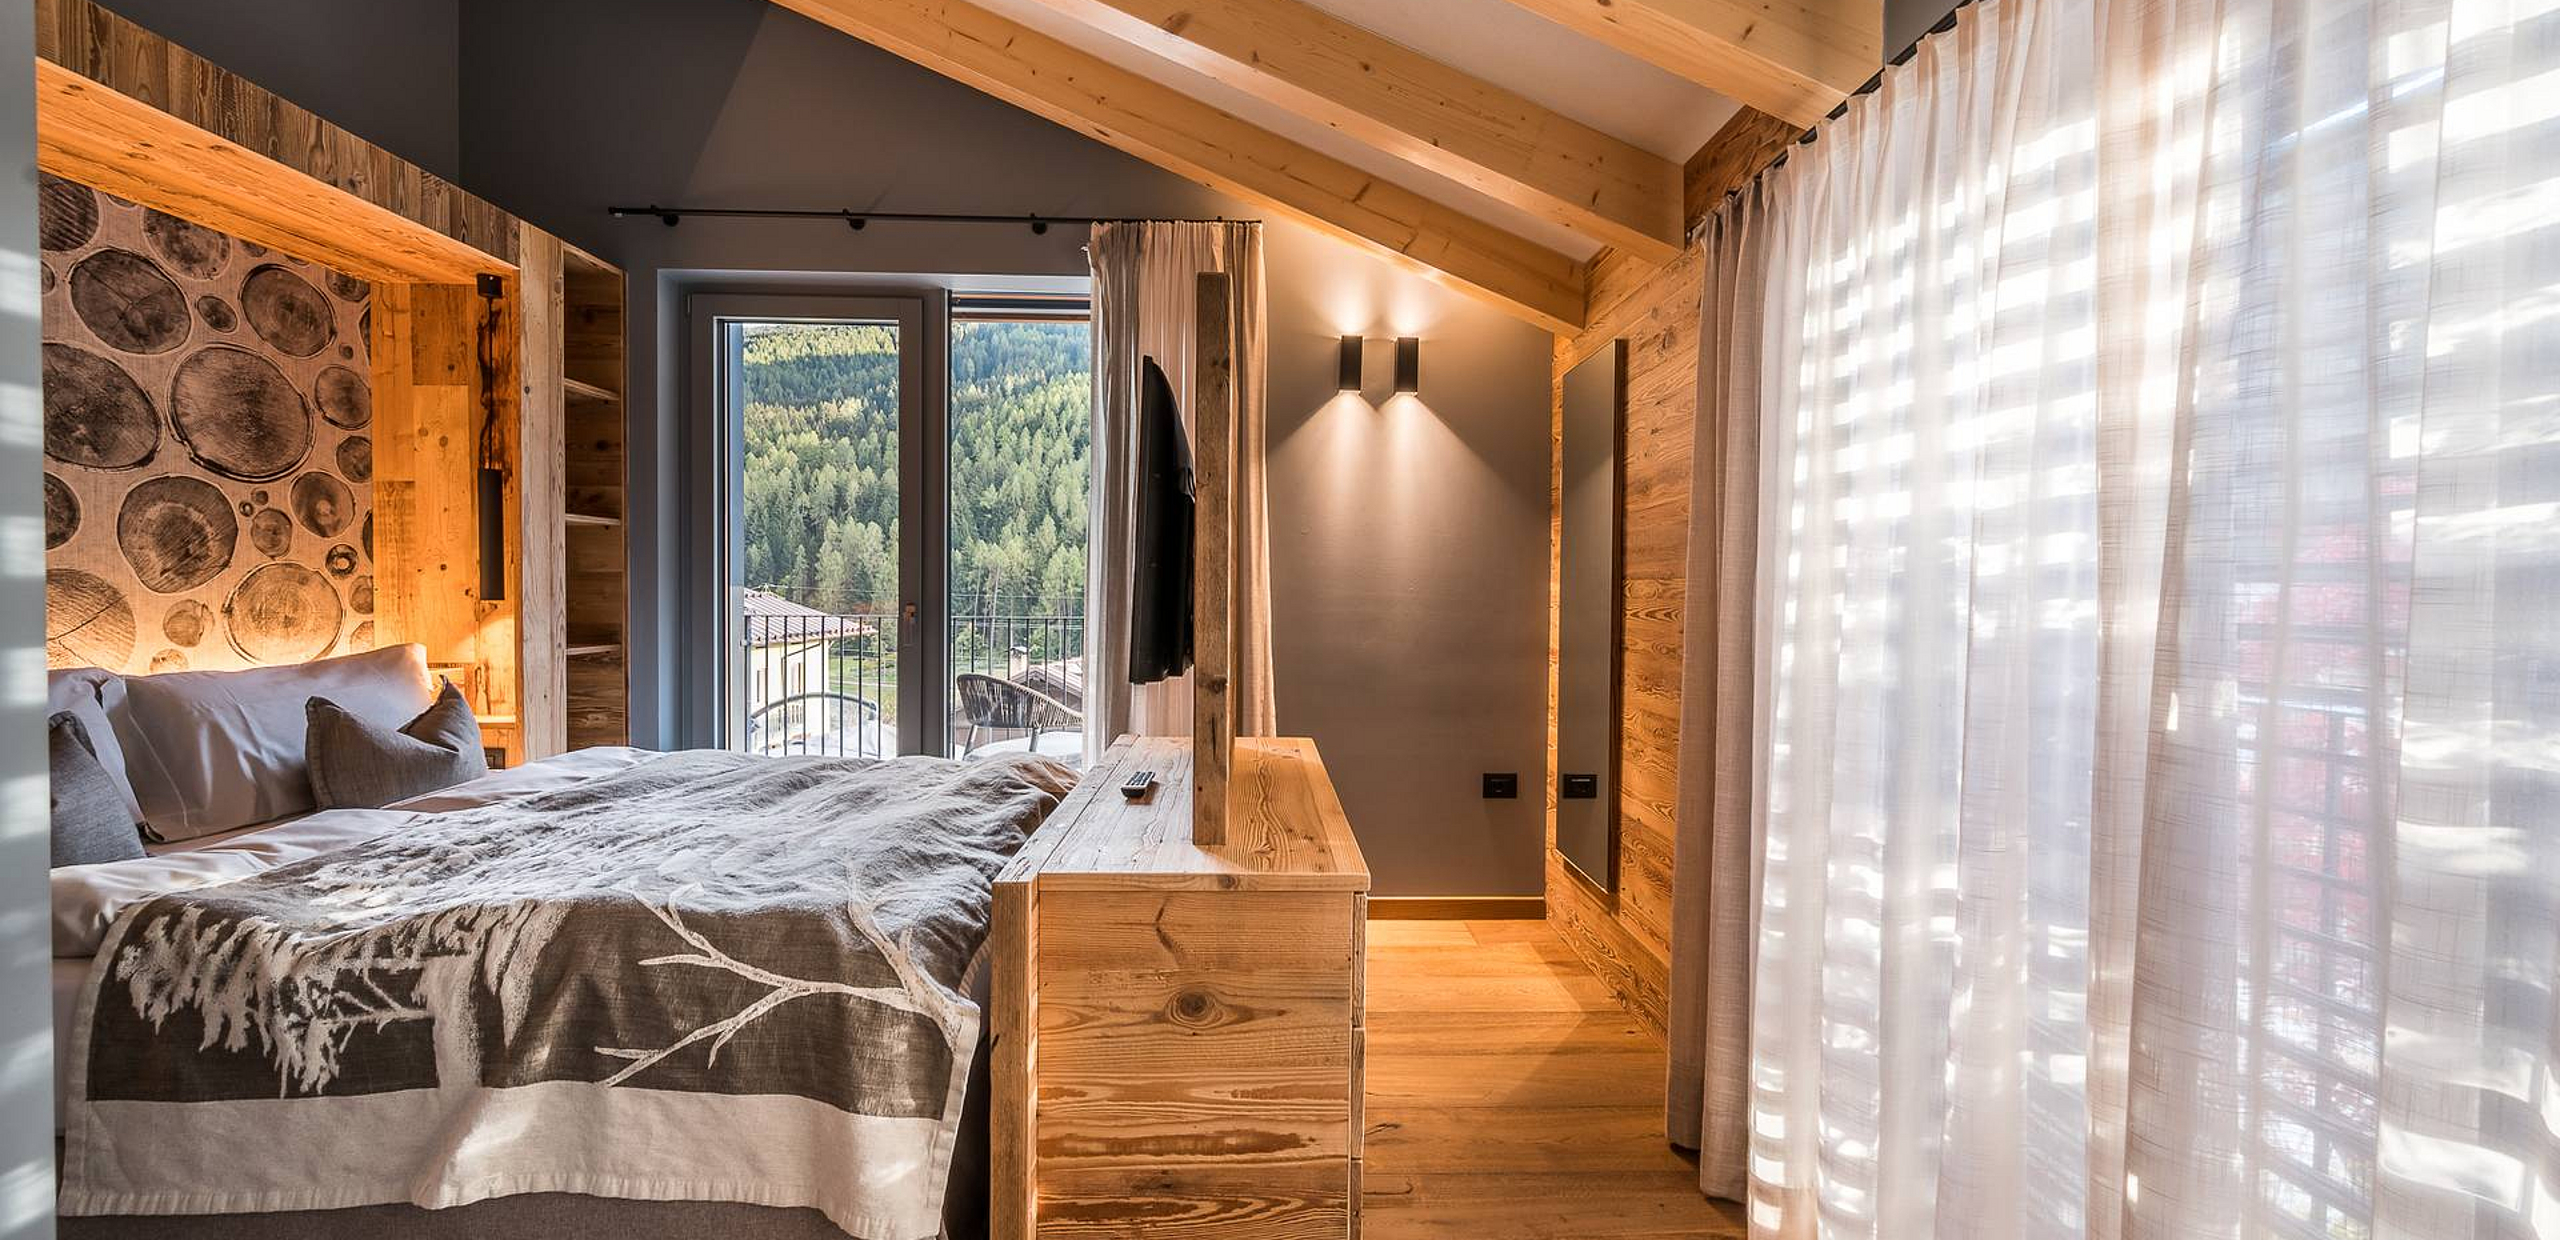 Romantic getaway or family holiday Val di Sole